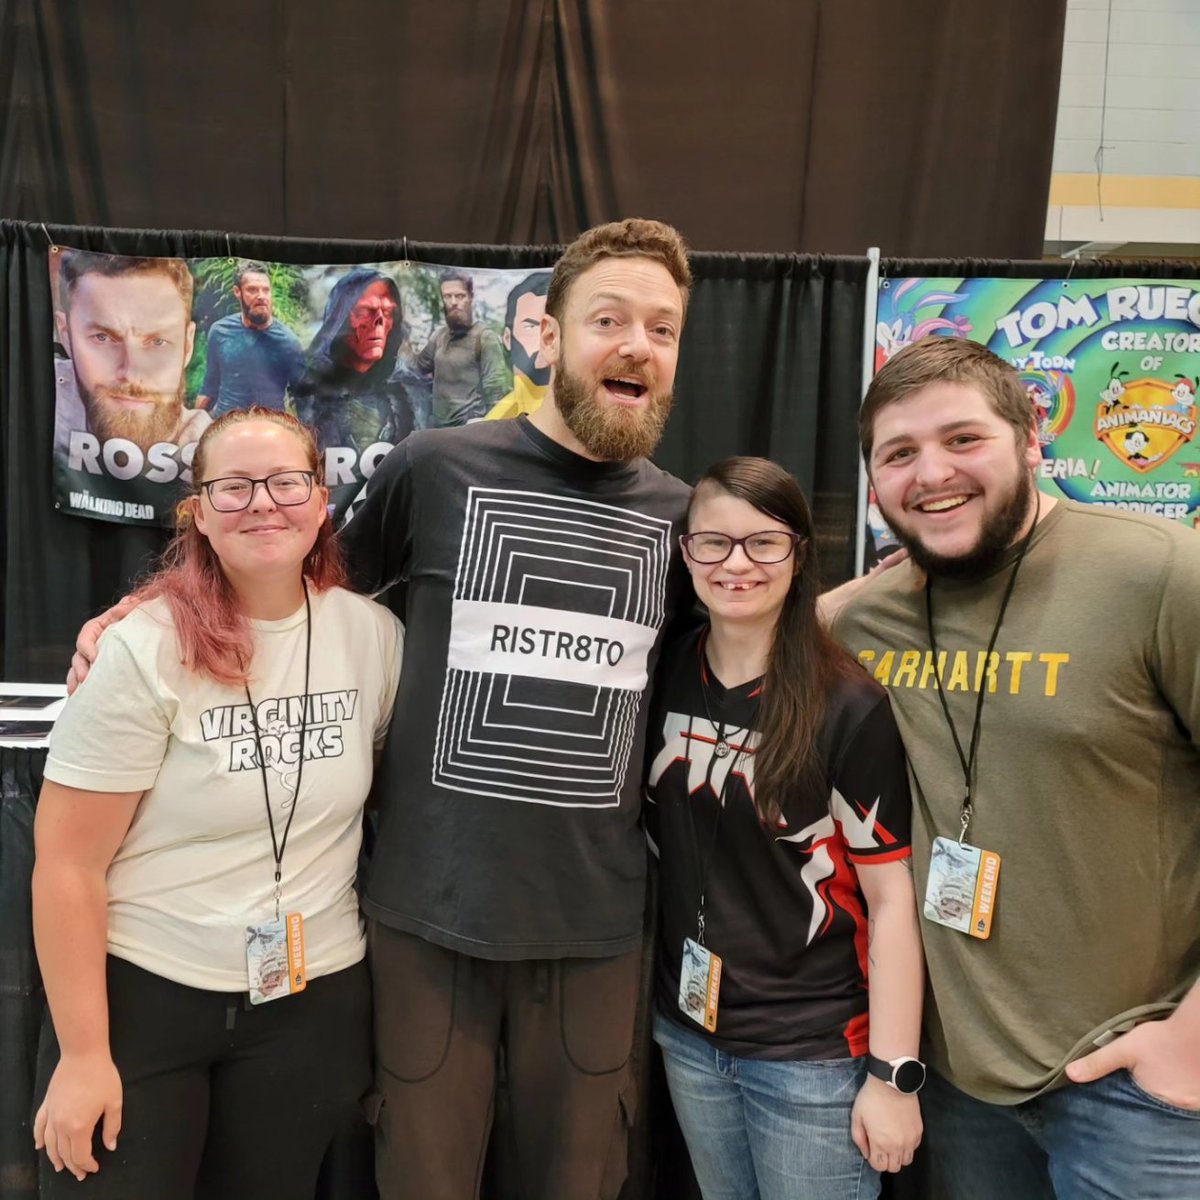 Got to meet @RossMarquand at comic con. Seen him twice! We talked for a bit. He was so nice. It was a pleasure to meet you! #drpeppercrew